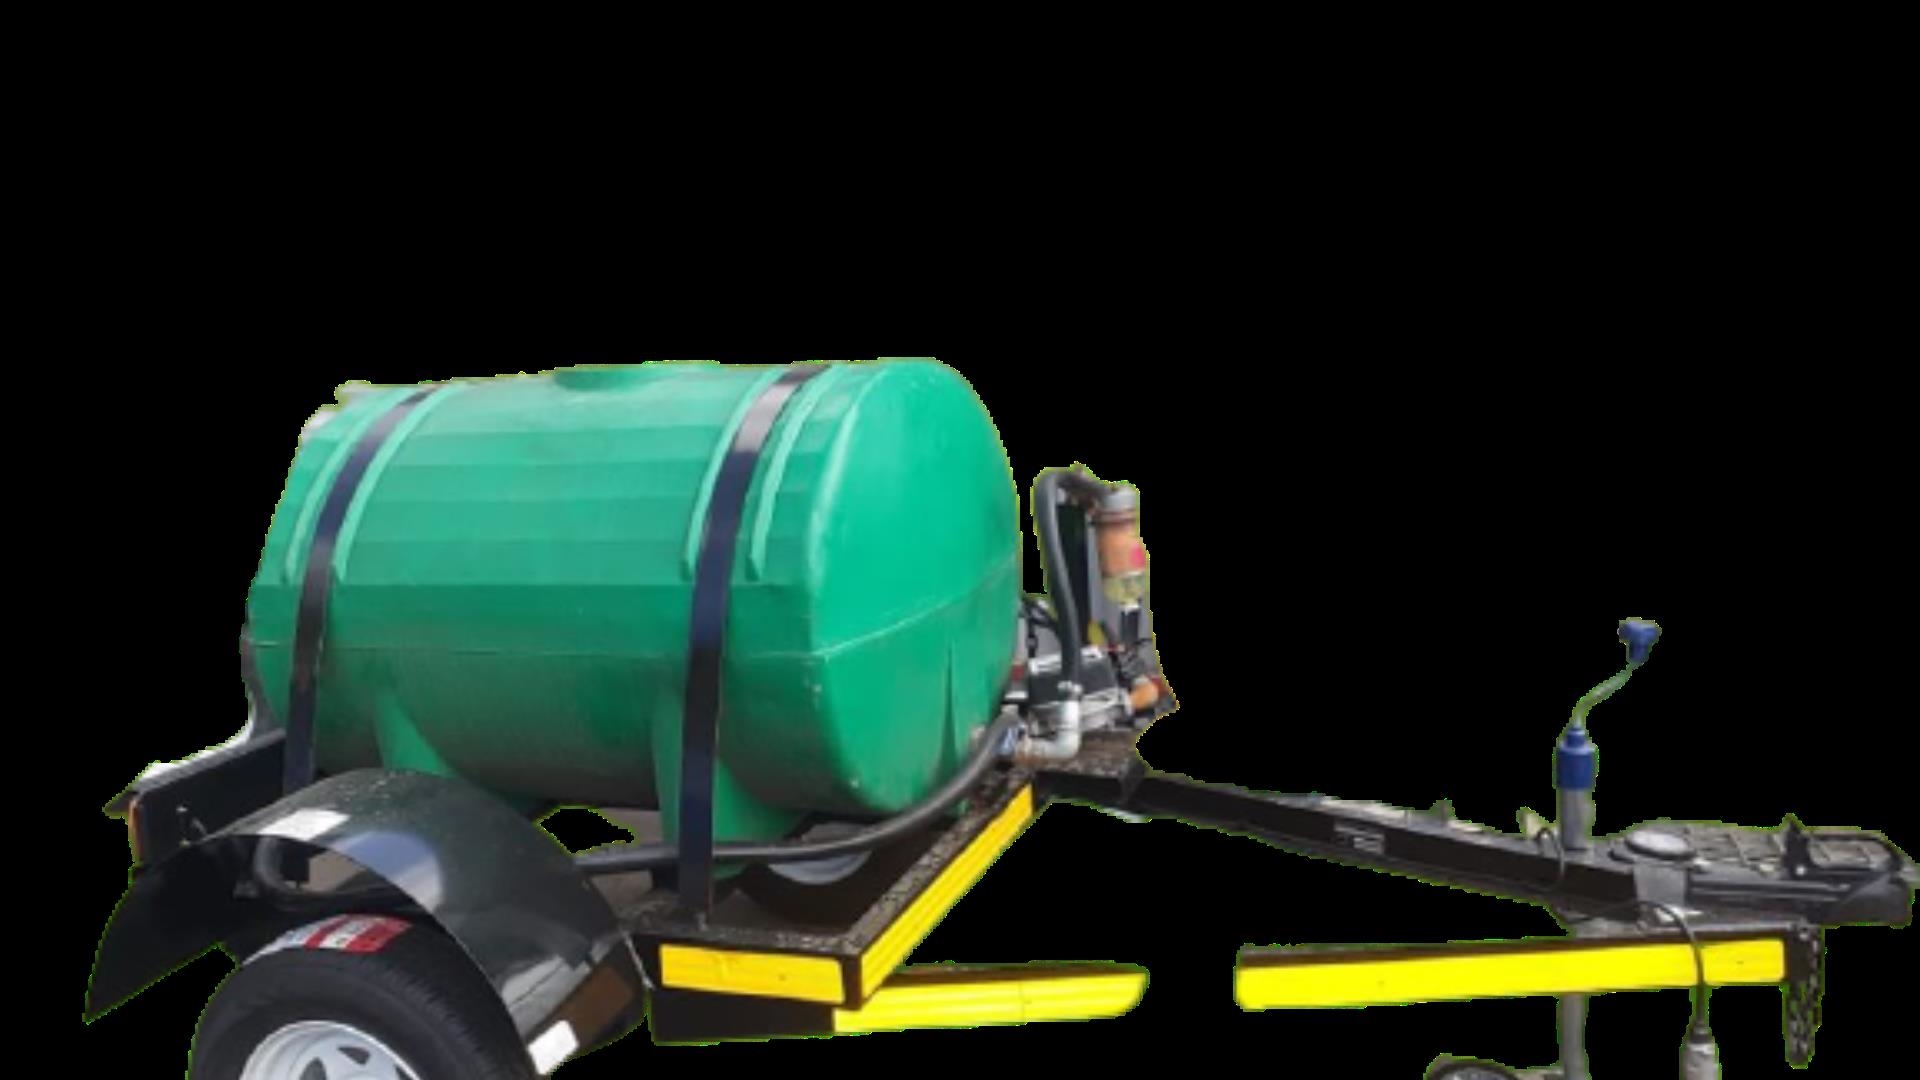 Custom Diesel bowser trailer 500 Litre Plastic Diesel Bowser... BLK Friday SPL 2022 for sale by Jikelele Tankers and Trailers   | Truck & Trailer Marketplaces